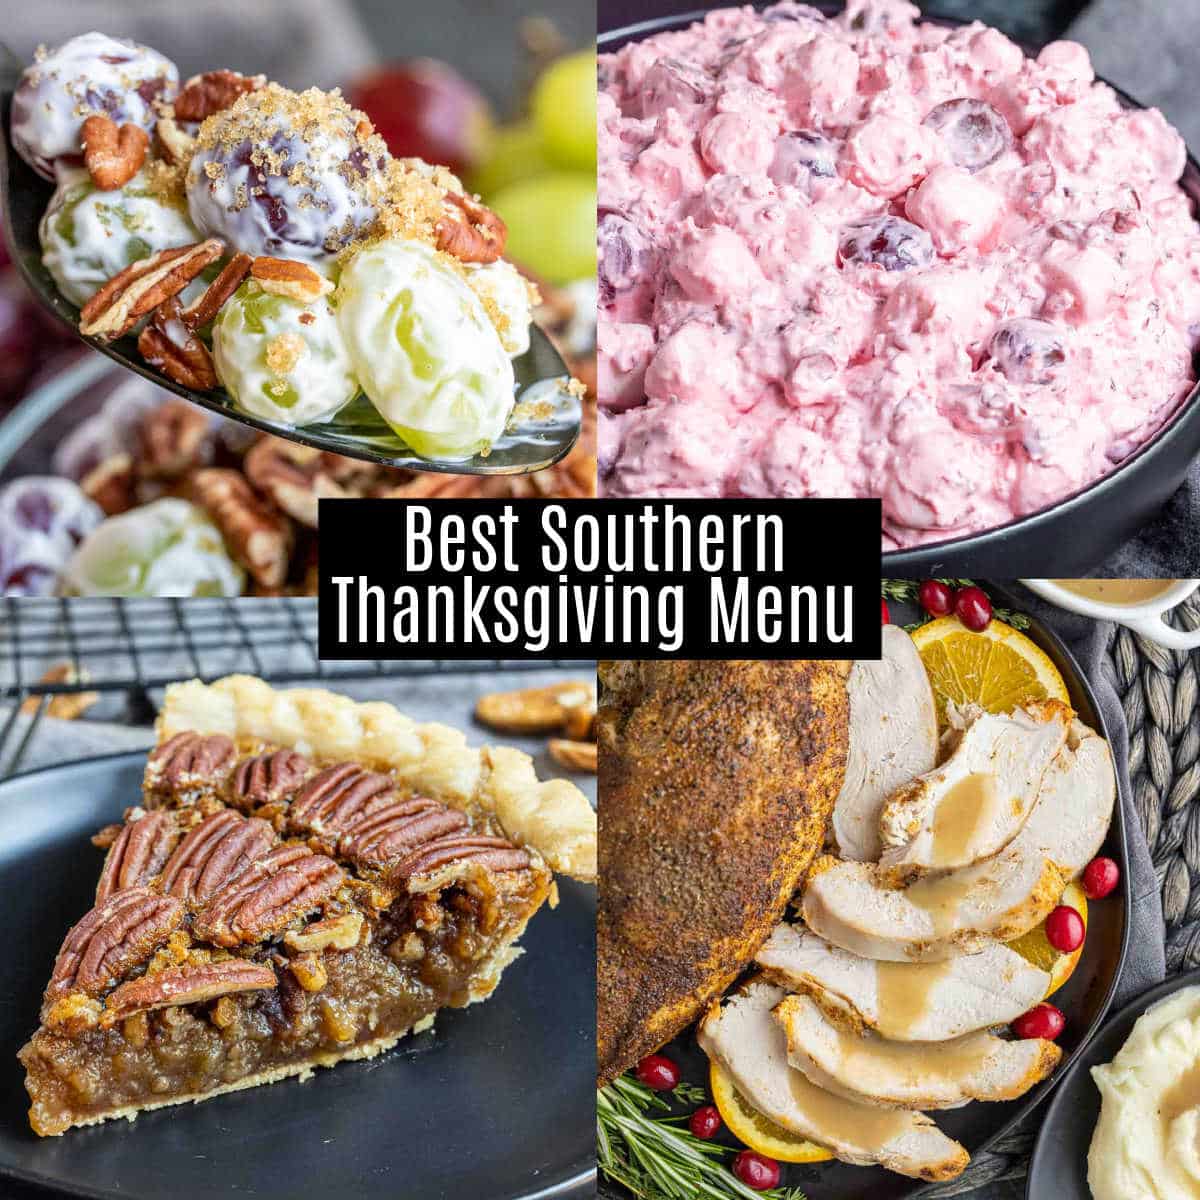 Collage of the Best Southern Thanksgiving Menu